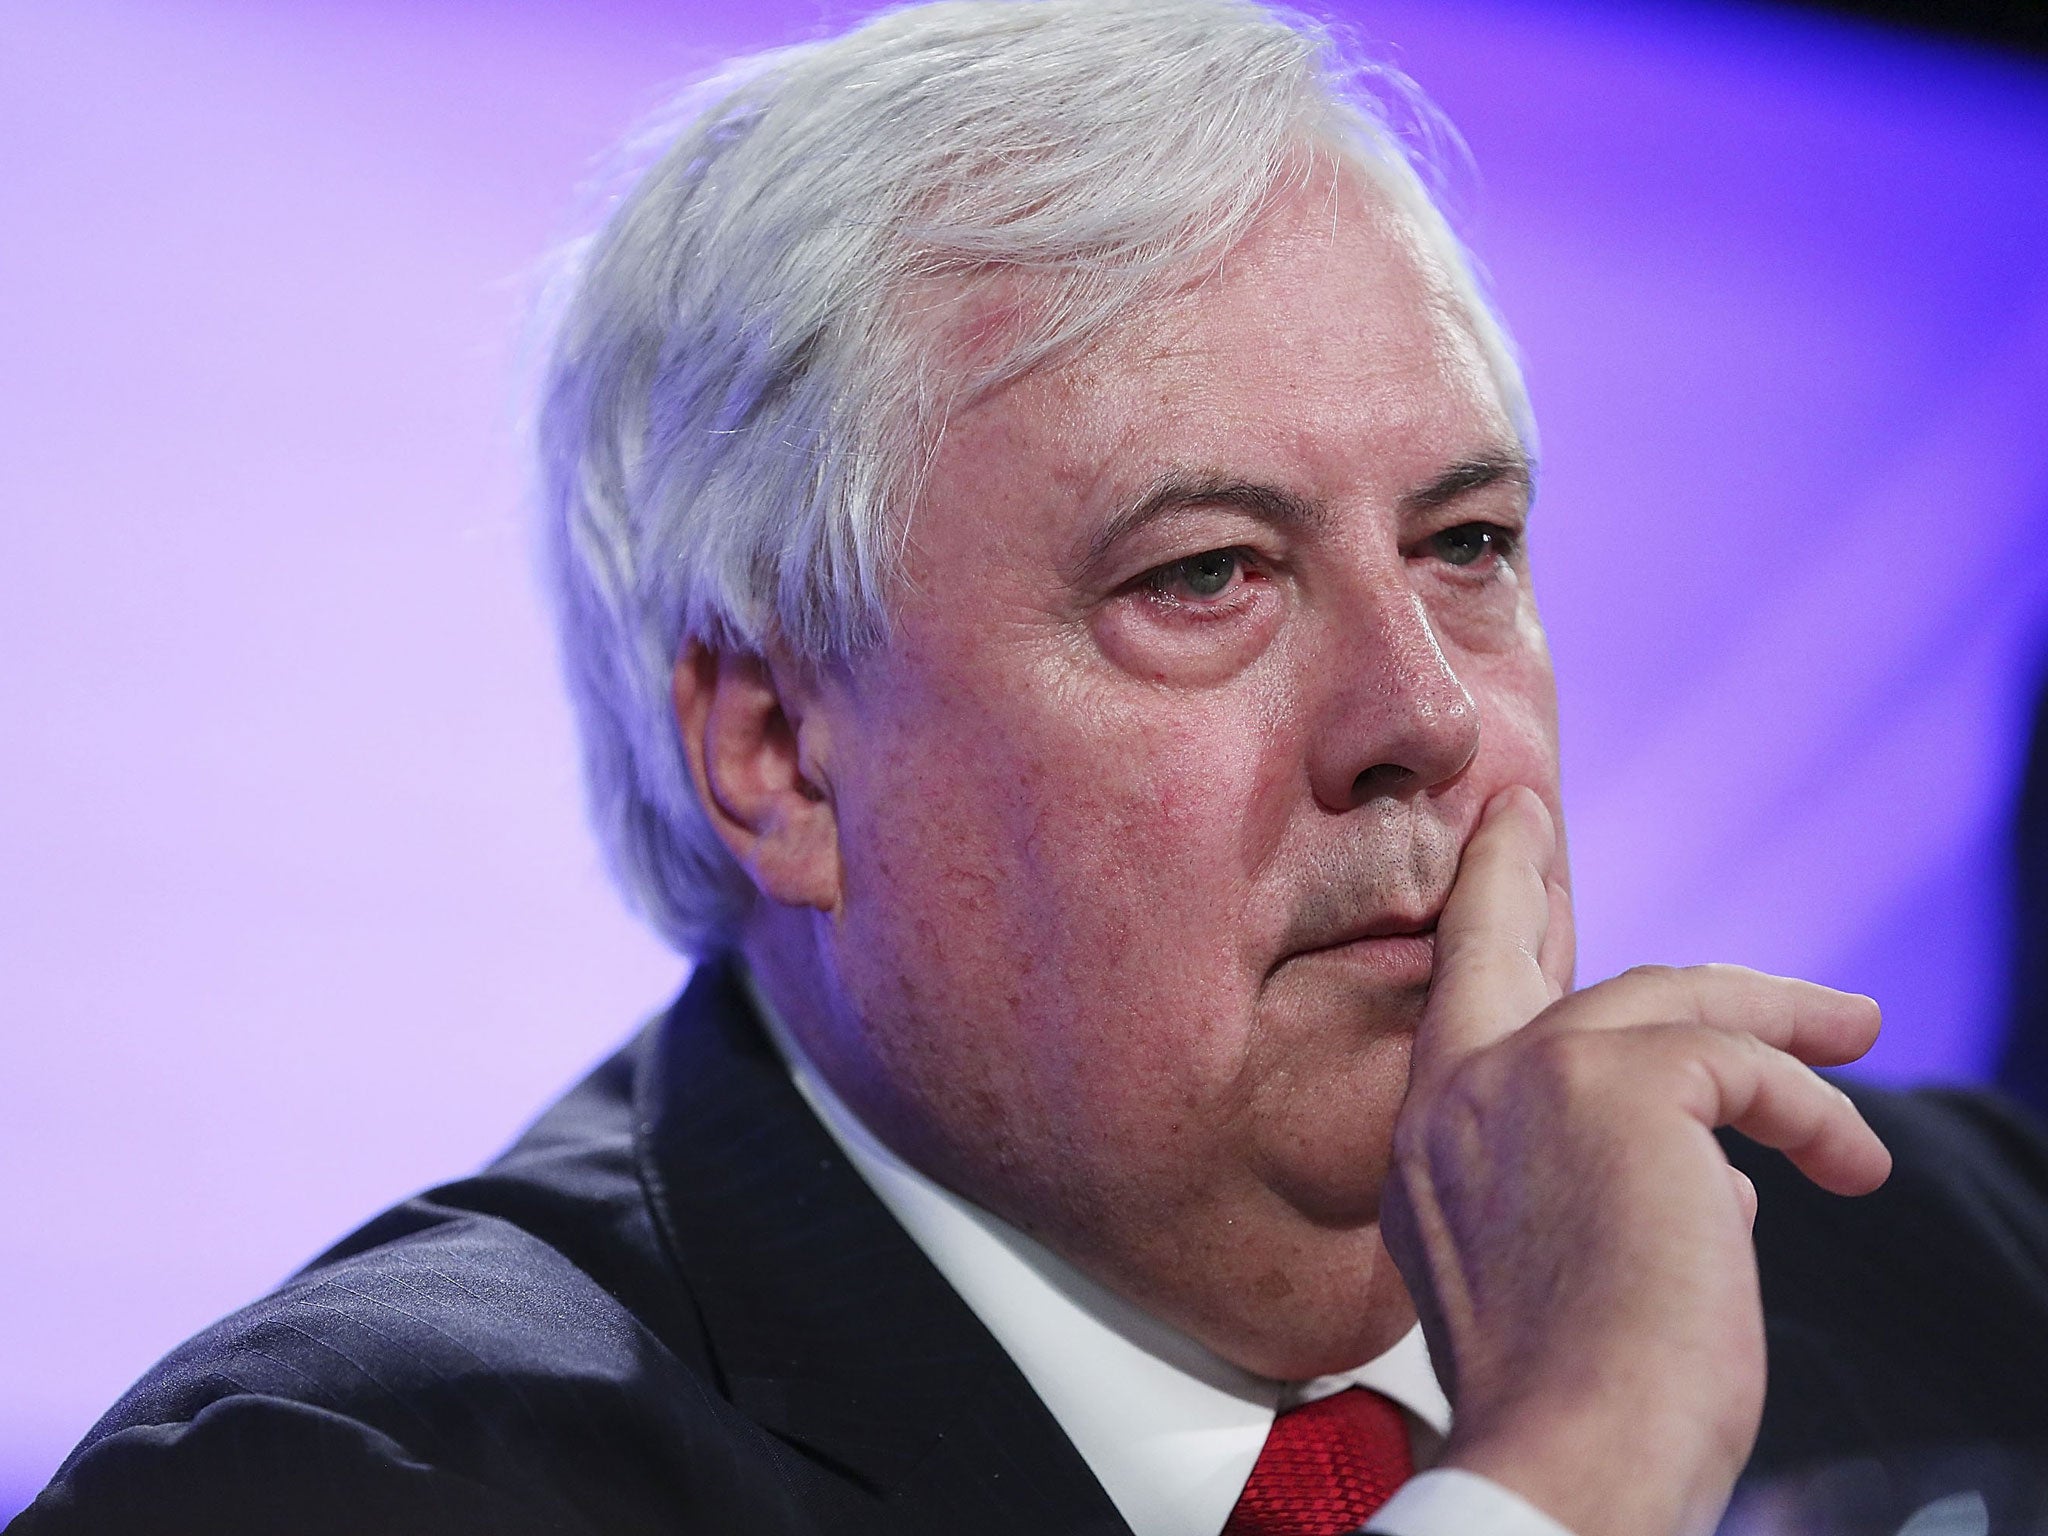 Clive Palmer: The mining magnate claims Wendi Deng is a Chinese spy